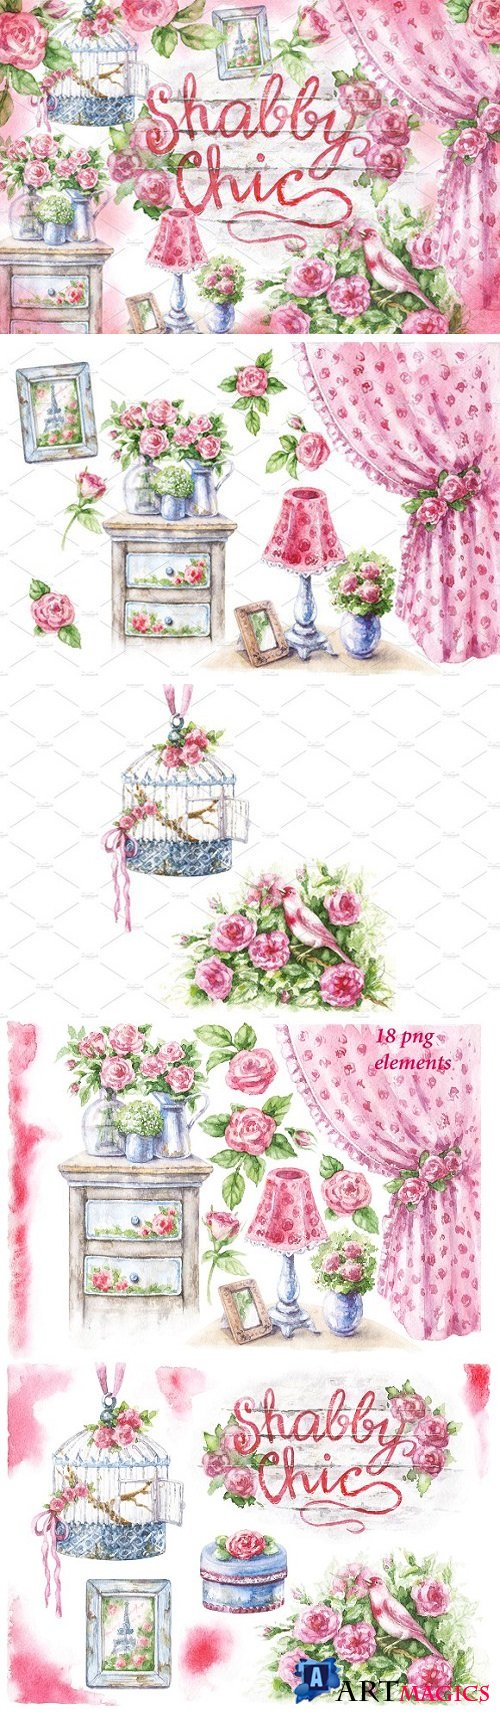 Watercolor Shabby Style Decor Items 2300926